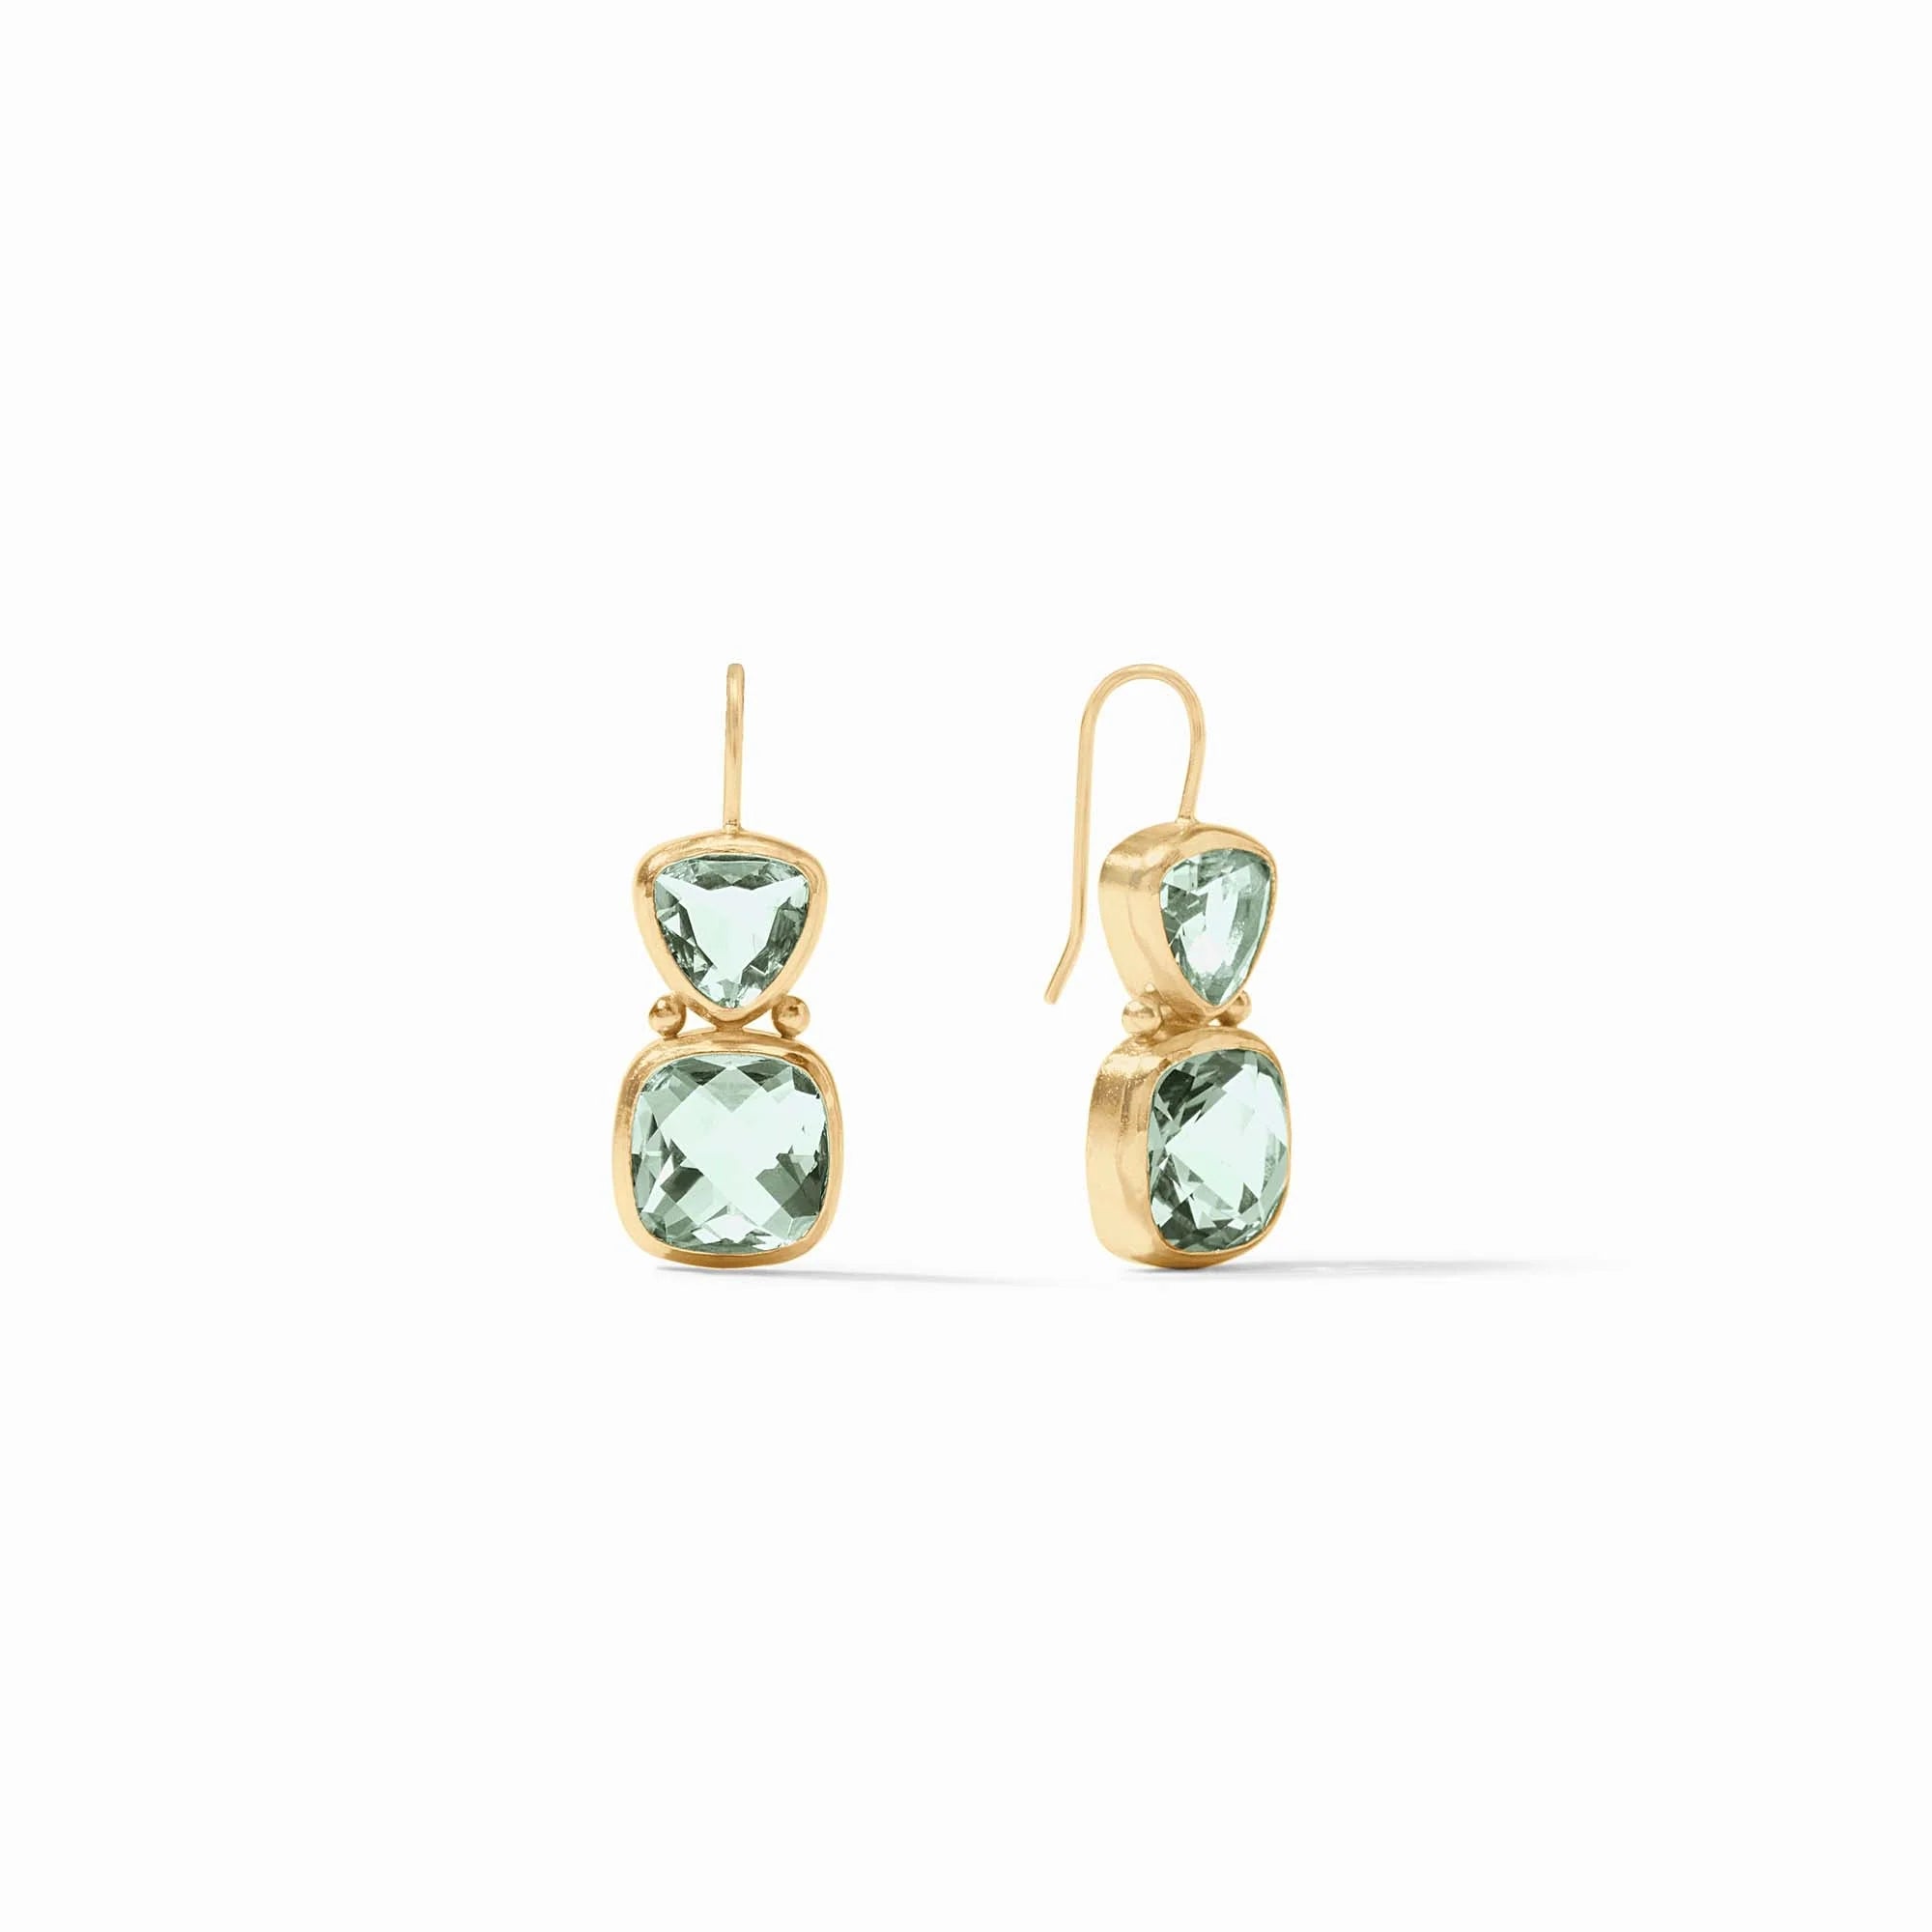 Julie Vos Aquitaine Earring - (two colors)